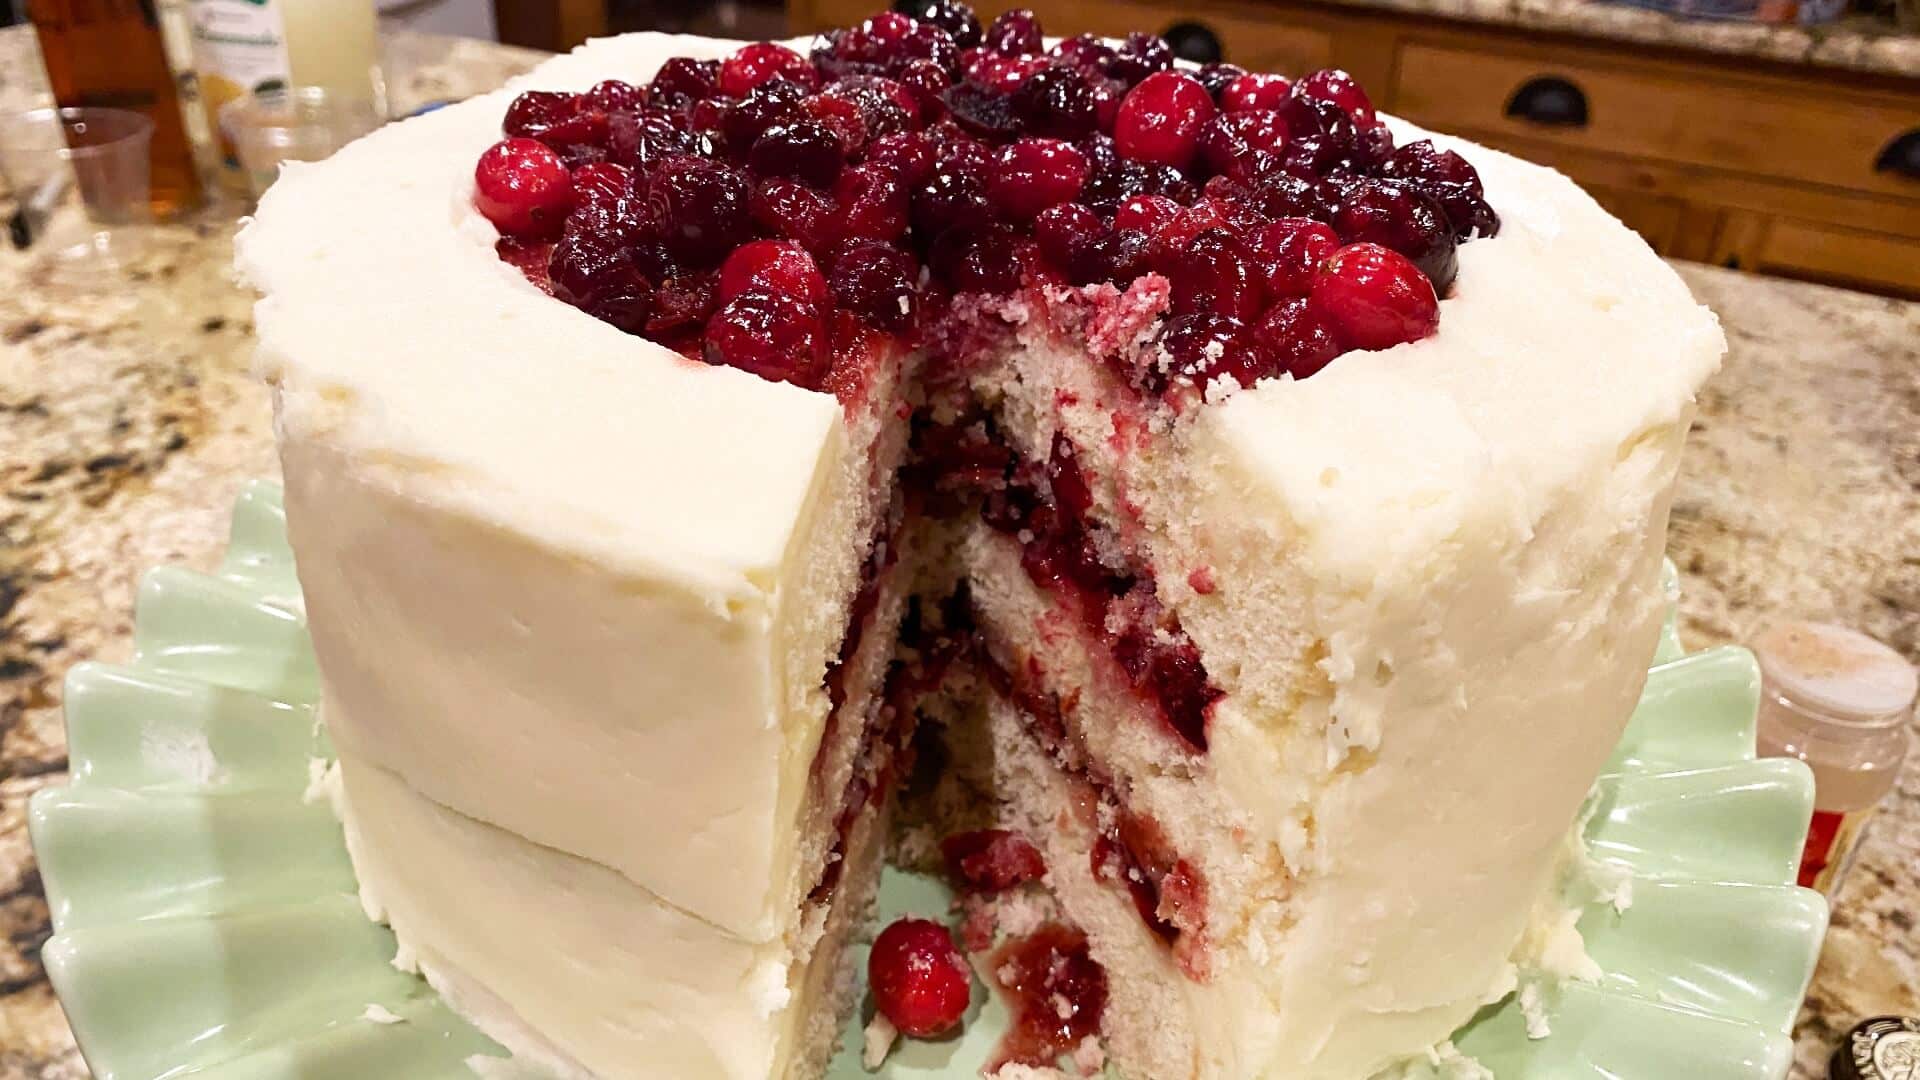 layered white cake with a cranberry filling, frosted with a white frosting and topped with more cranberry topping.